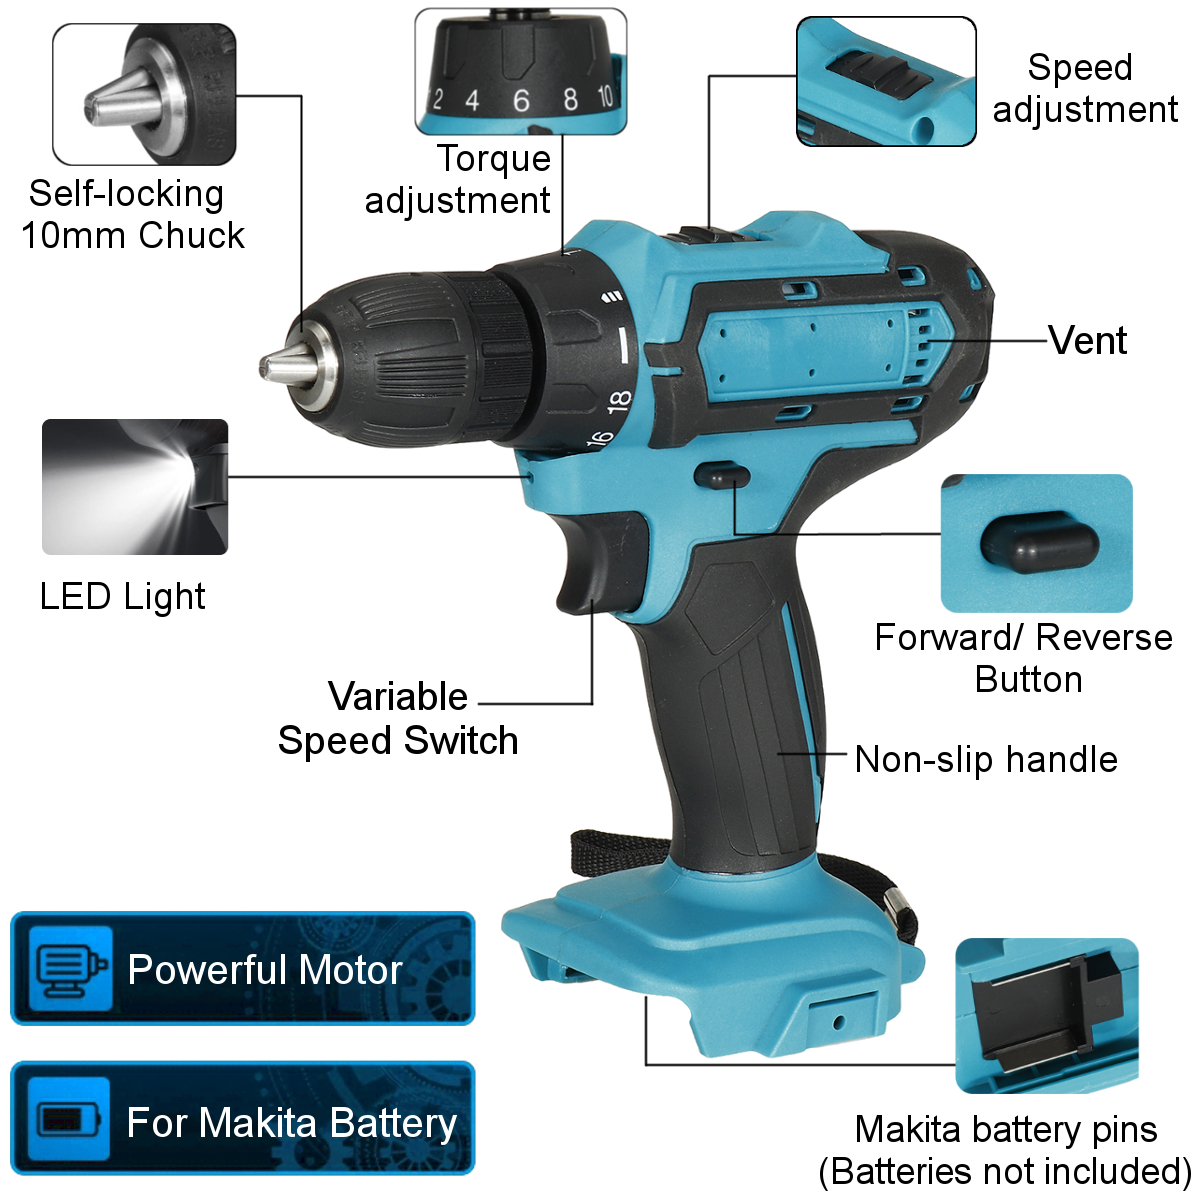 10mm-Chuck-520Nm-Cordless-Electric-Drill-Driver-Replacement-for-Makita-18V21V-Battery-1789711-9